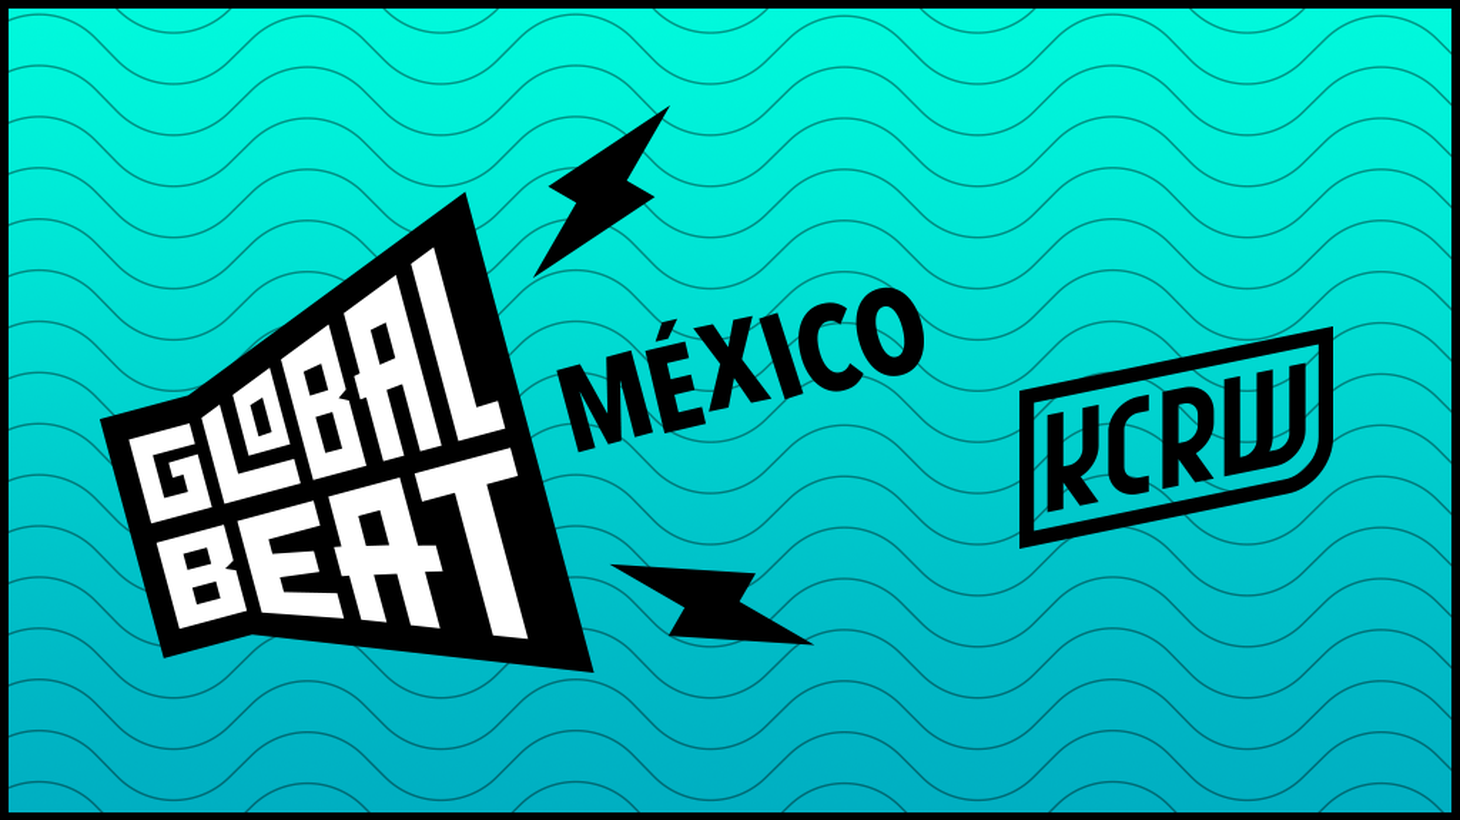 KCRW’s Global Beat is a new series highlighting emerging artists from around the world.